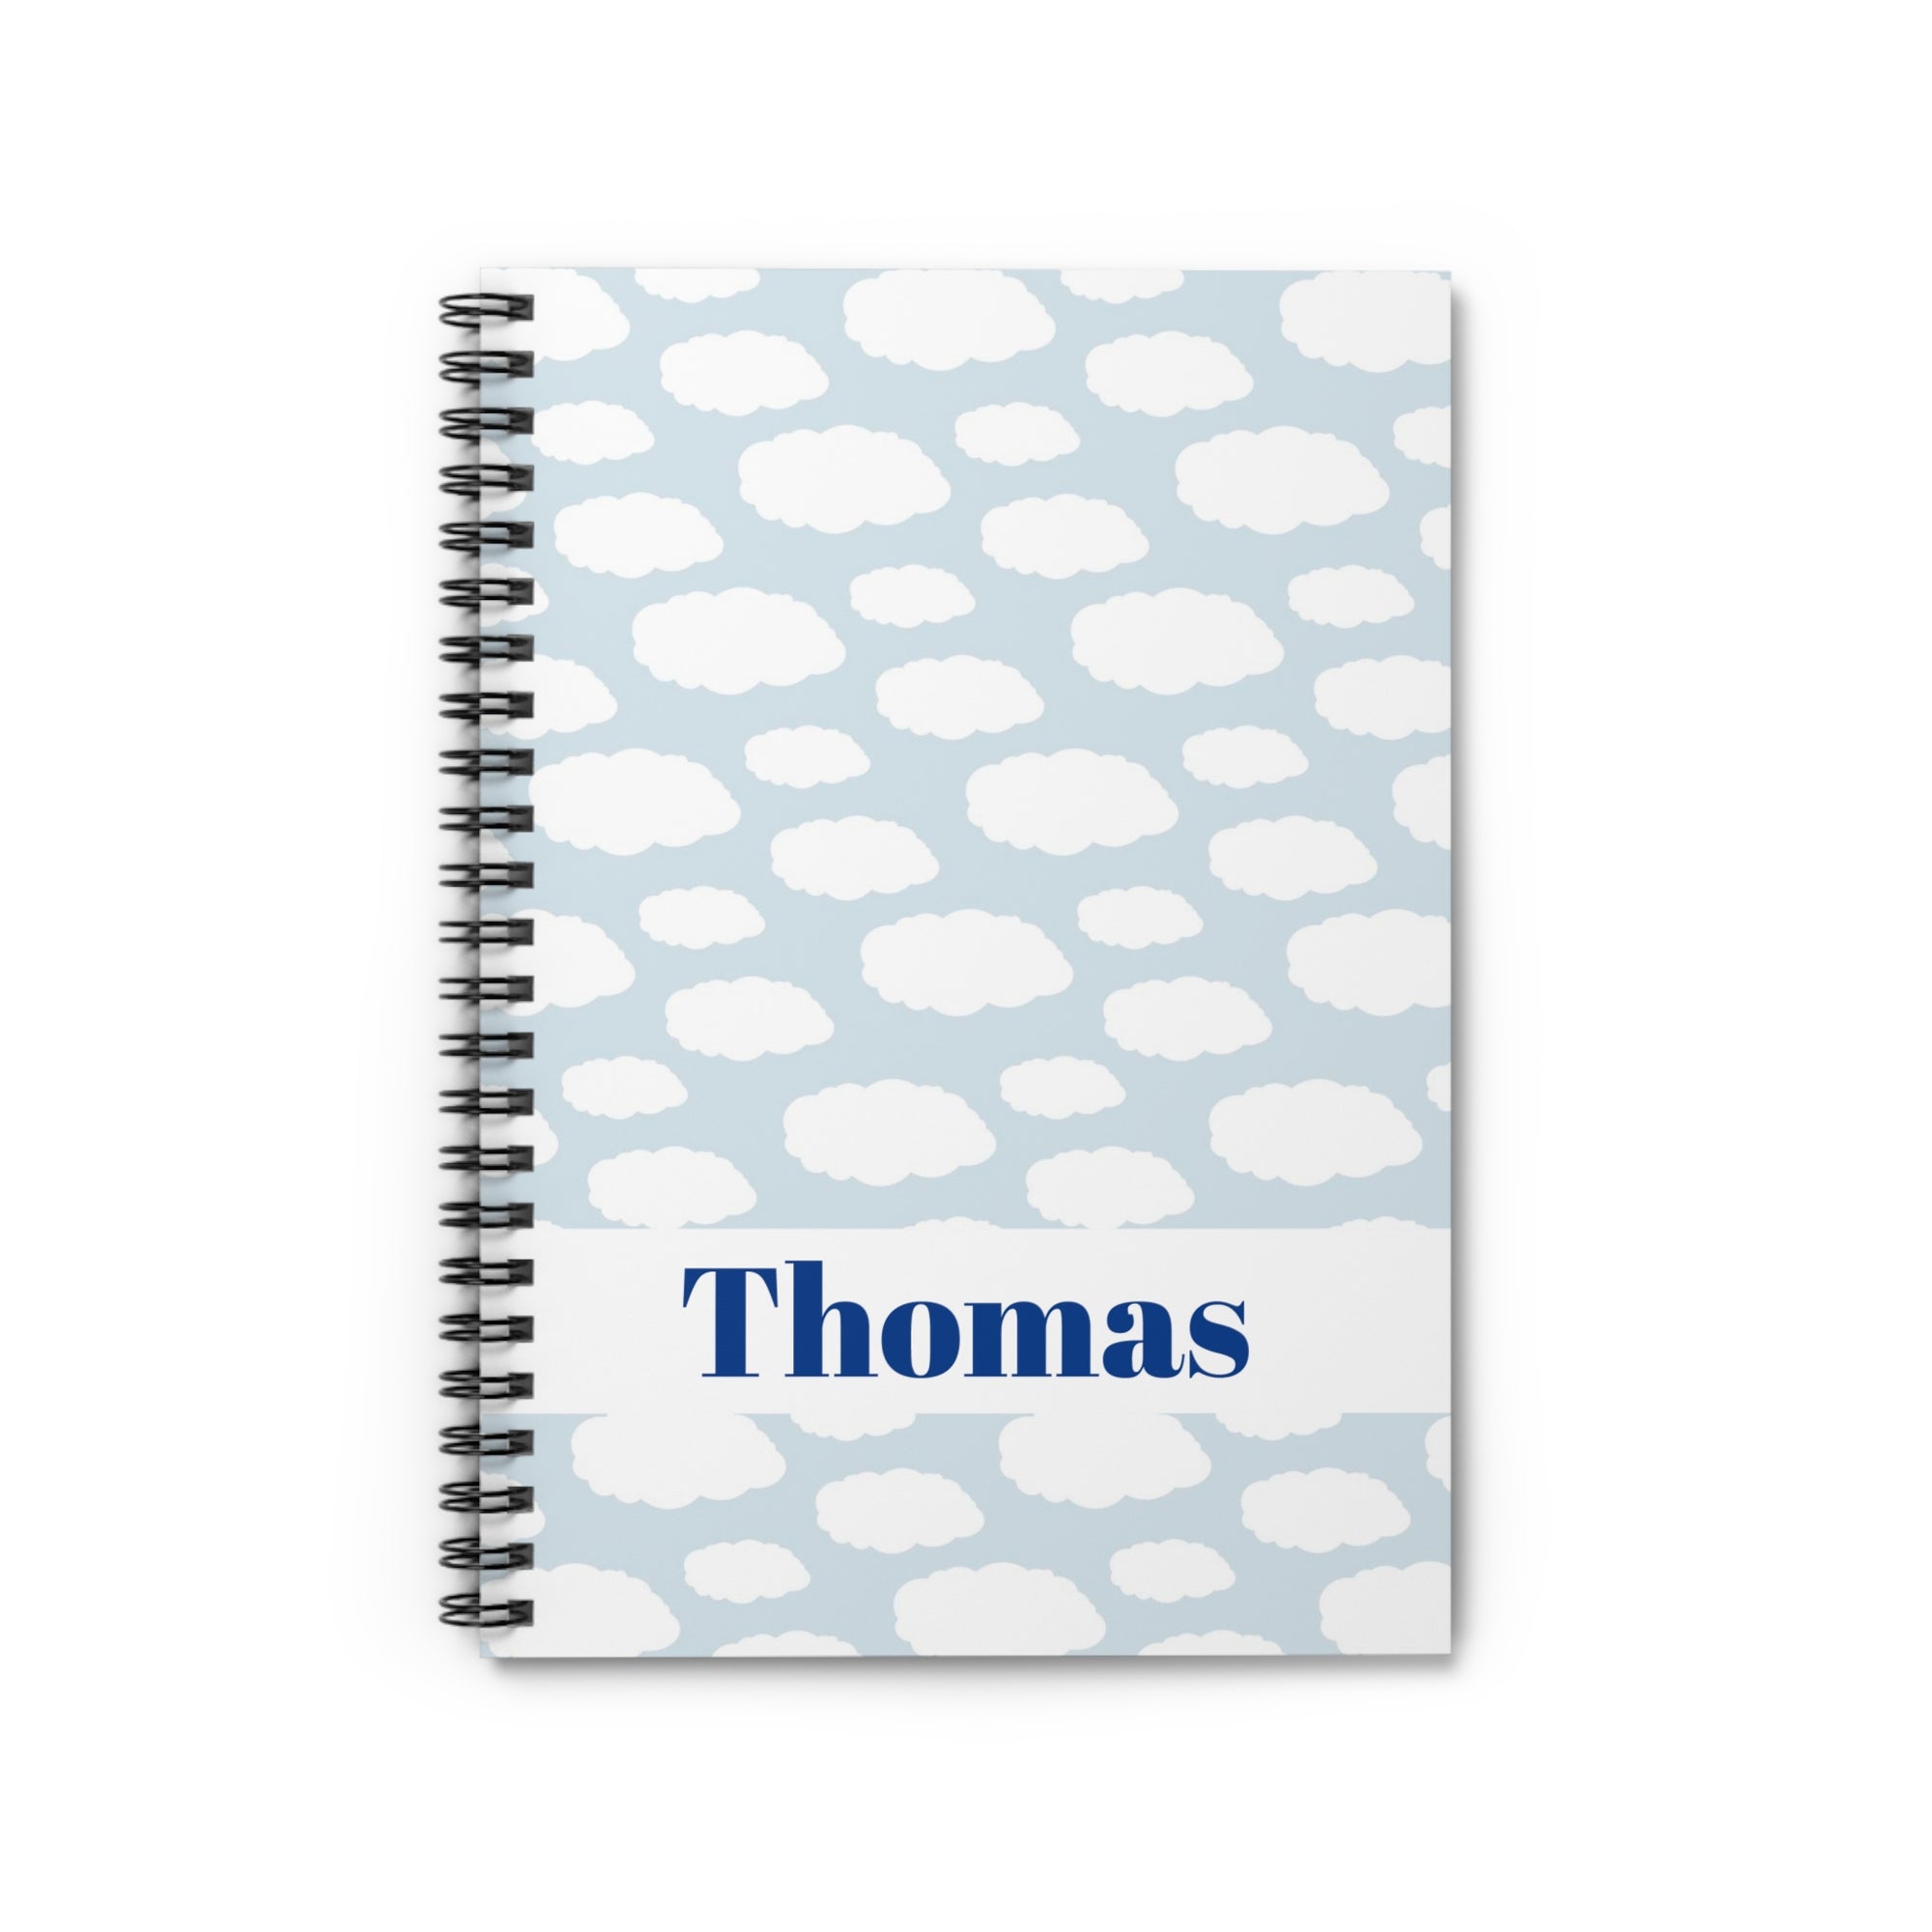 Back to School Notebook - Personalized